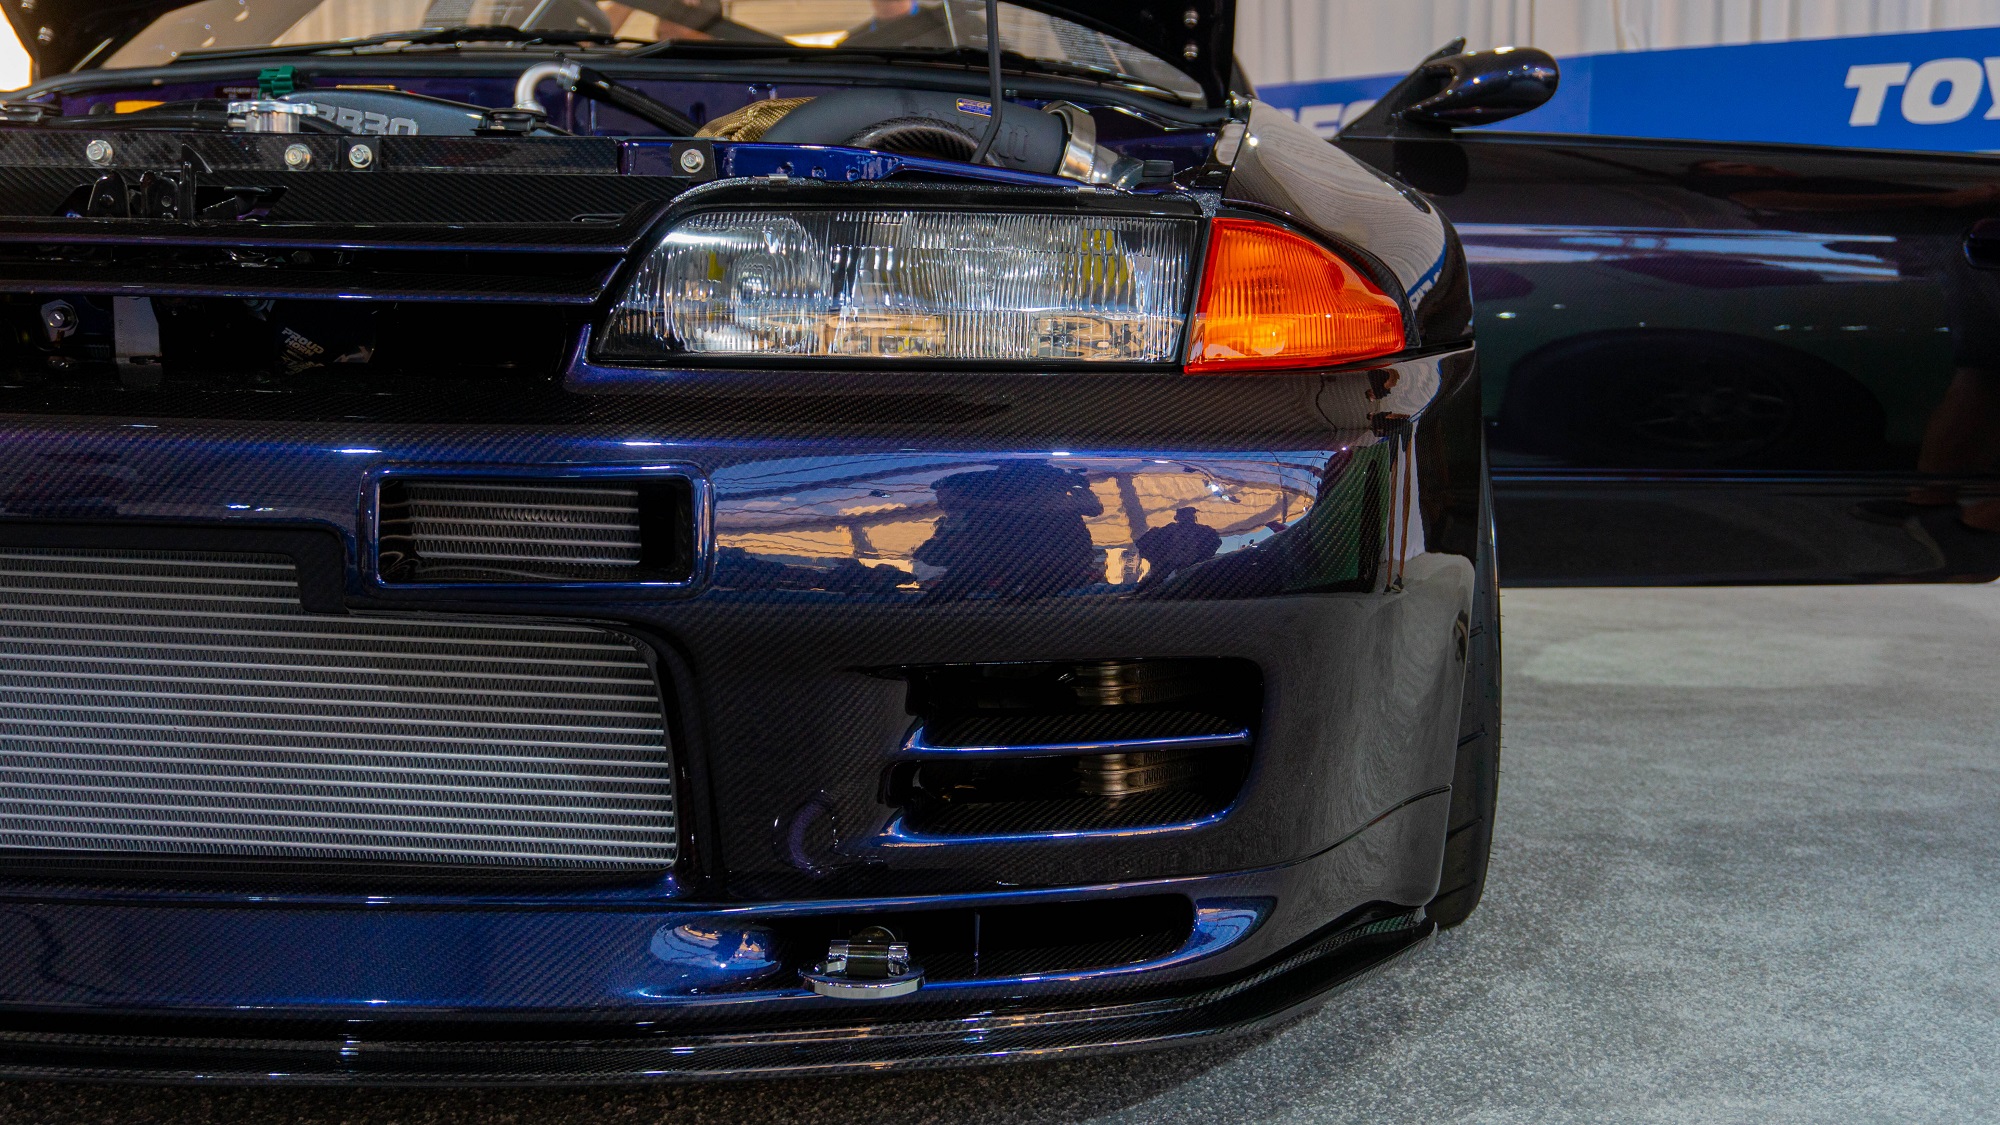 The full carbon fiber R32 GT-R channels classic aesthetics with modern carbon weaves.